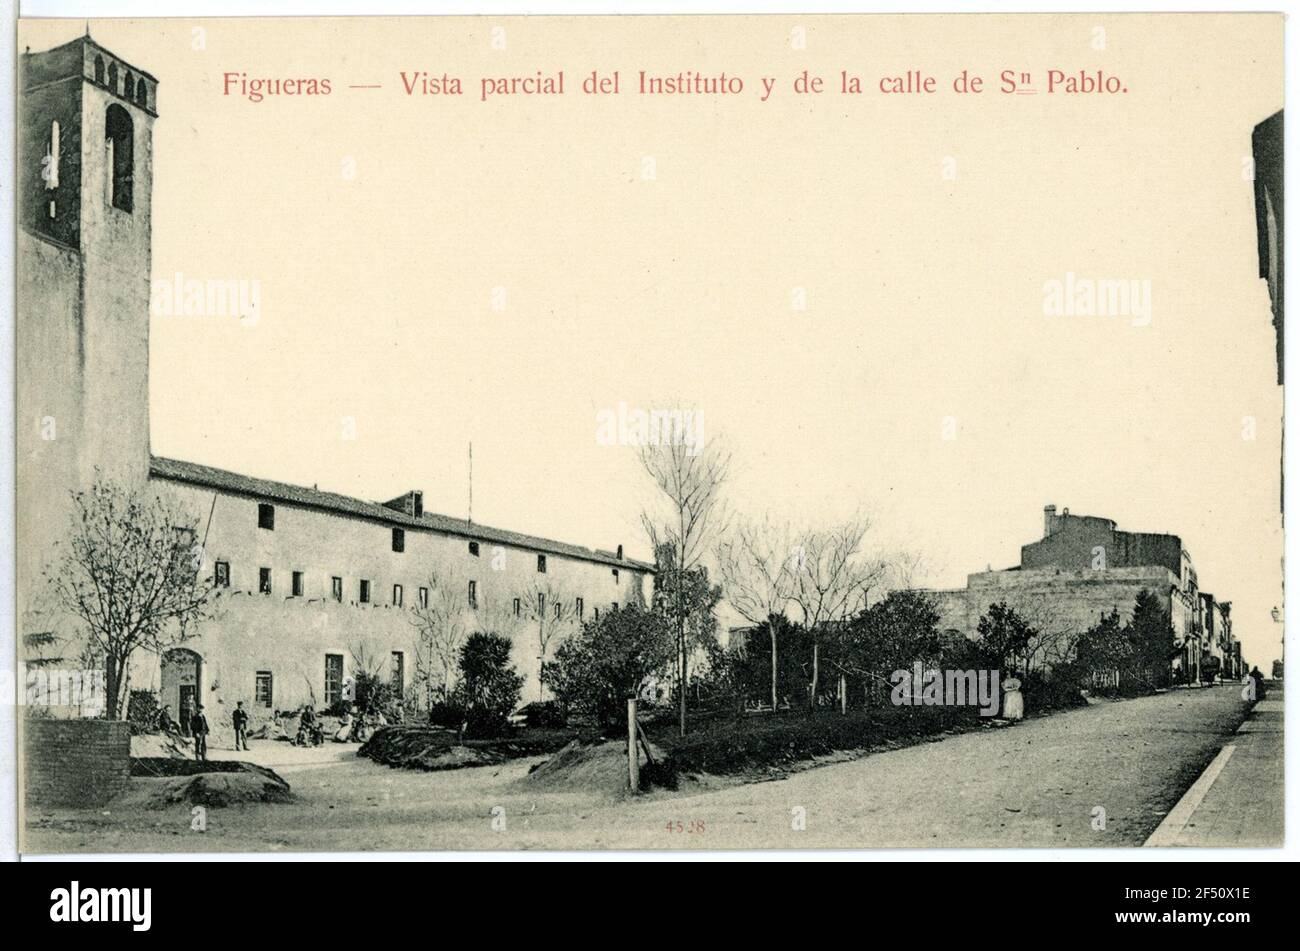 Partial view of the Institute and Street of San Pablo Figueras Partial view of the institute and the street of S pablo Stock Photo